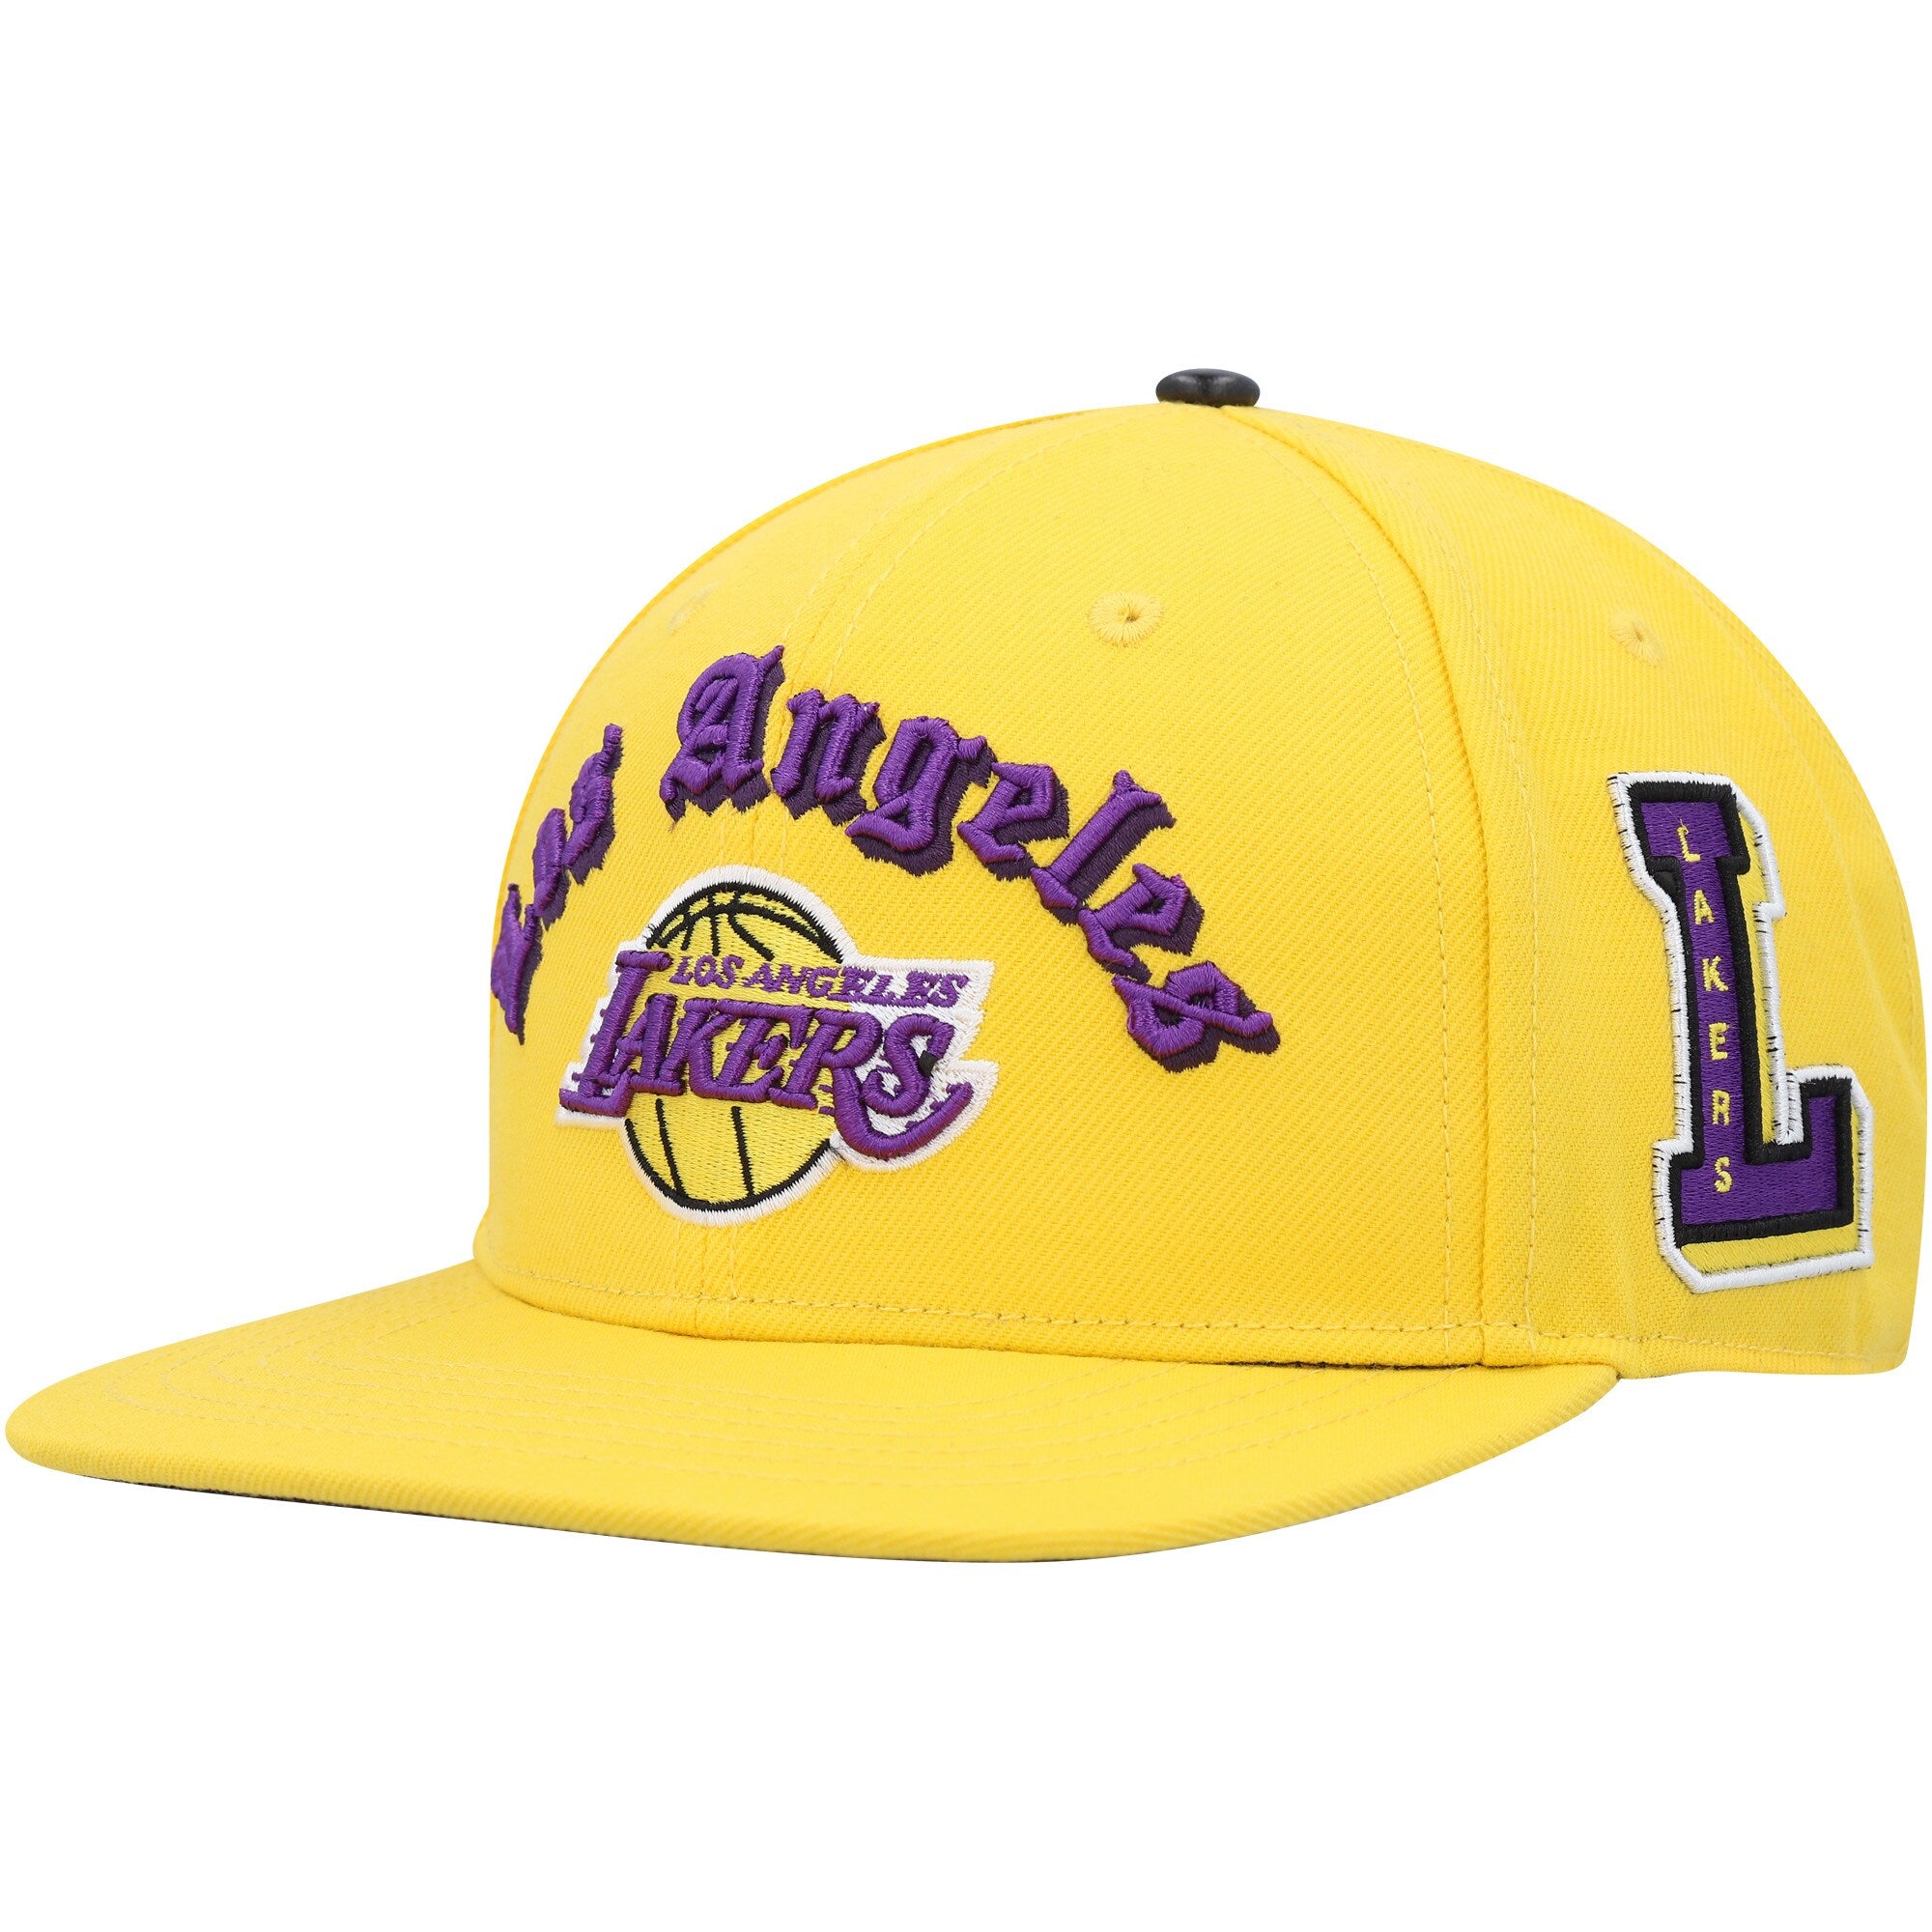 Los Angeles Lakers Pro Standard Old English Snapback Hat - Gold ...